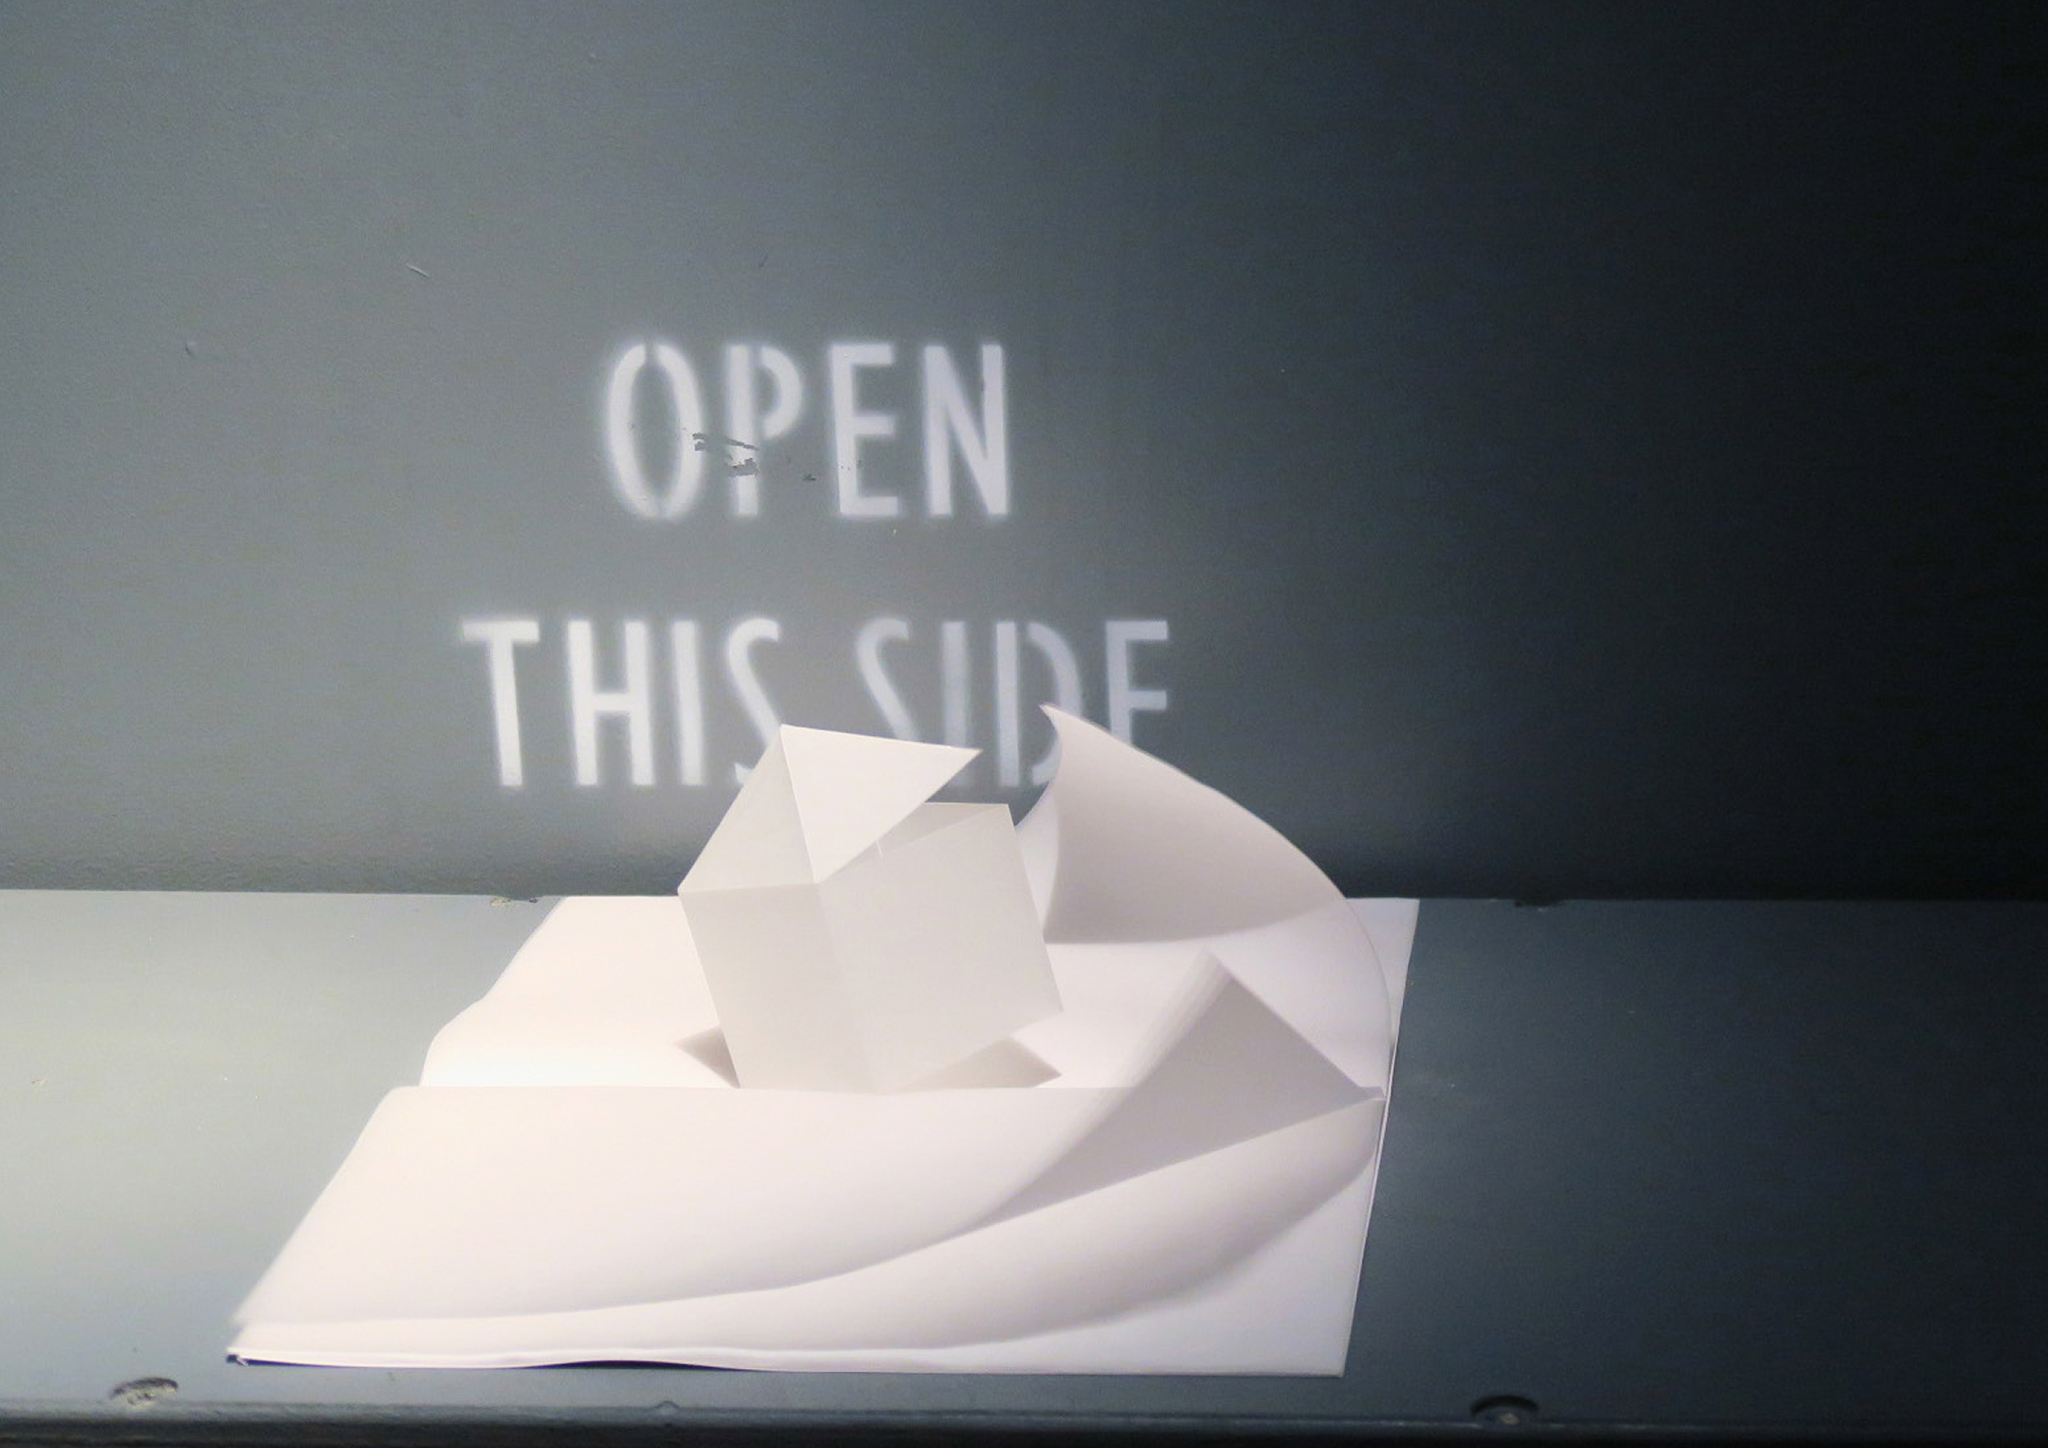 THE SOUND OF WIND, paper and wind, exhibition "Vicino, ma non qui", Galleria Civica of Trento / MART, Museum of Modern and Contemporary Art of Trento, Italy, 2018 (Video frame by Antonio Cossu)